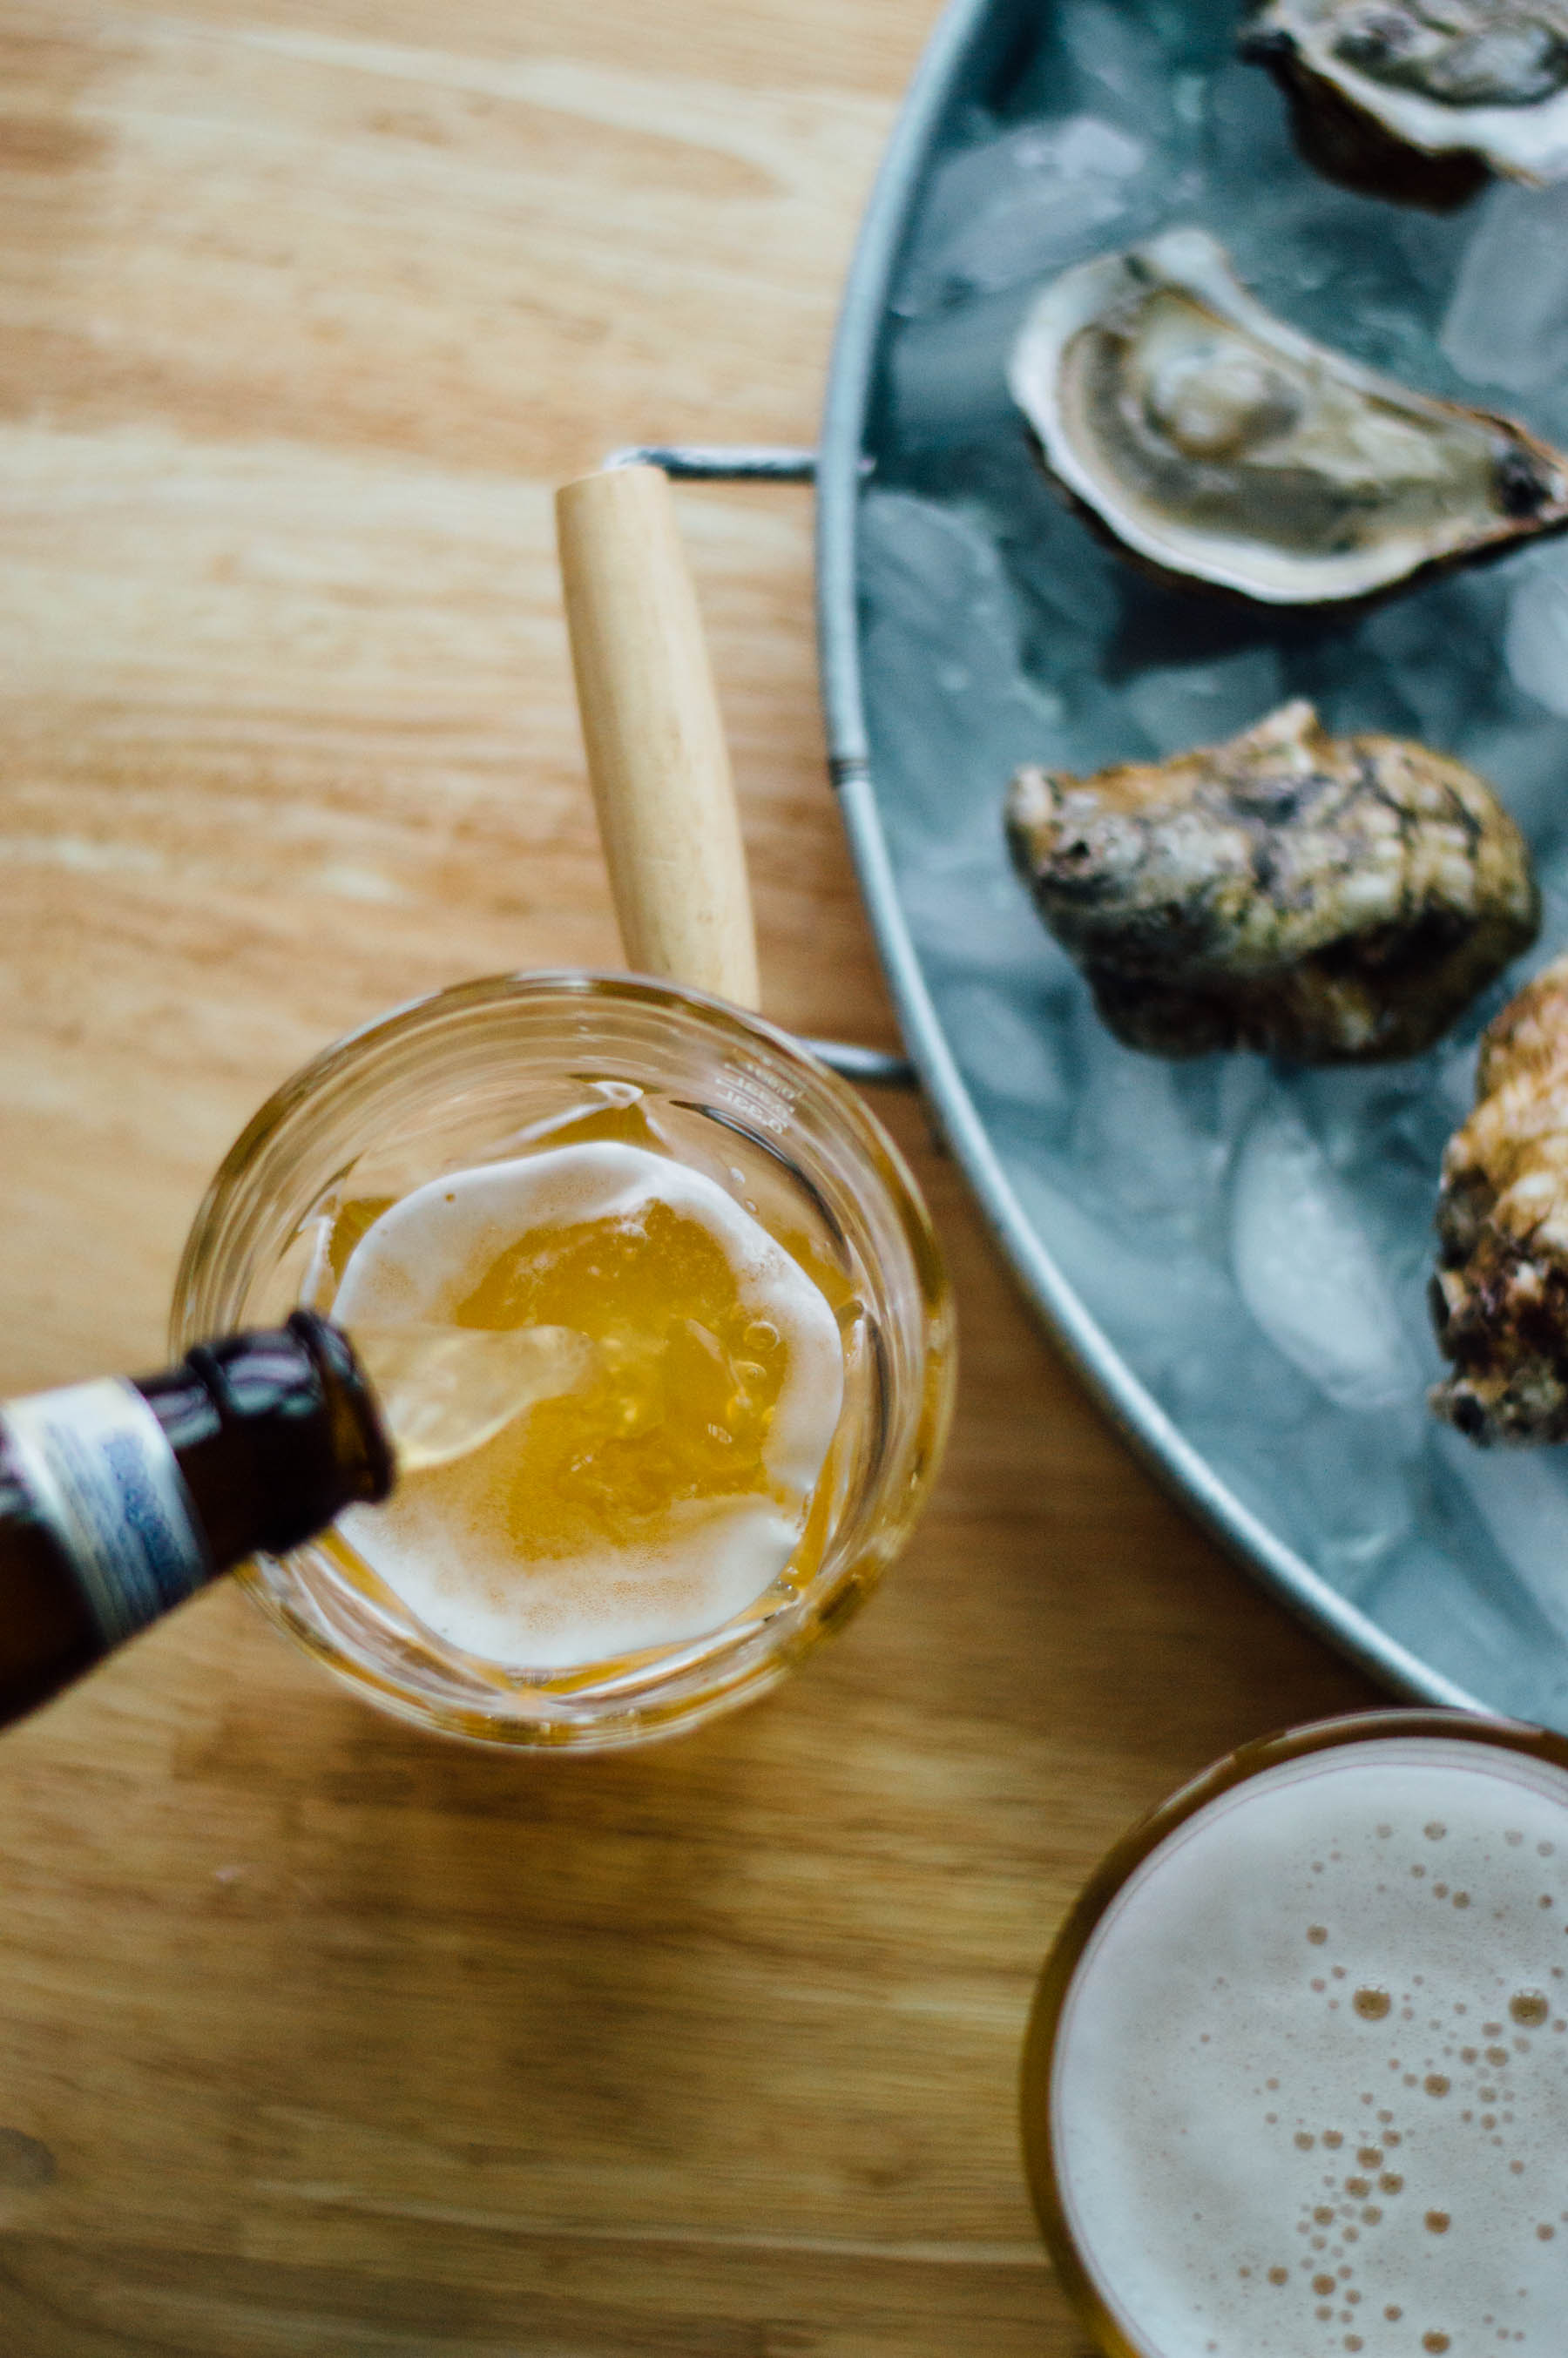 How to host an indoor oyster fest with Hoegaarden beer and 3 homemade mignonettes! | bygabriella.co